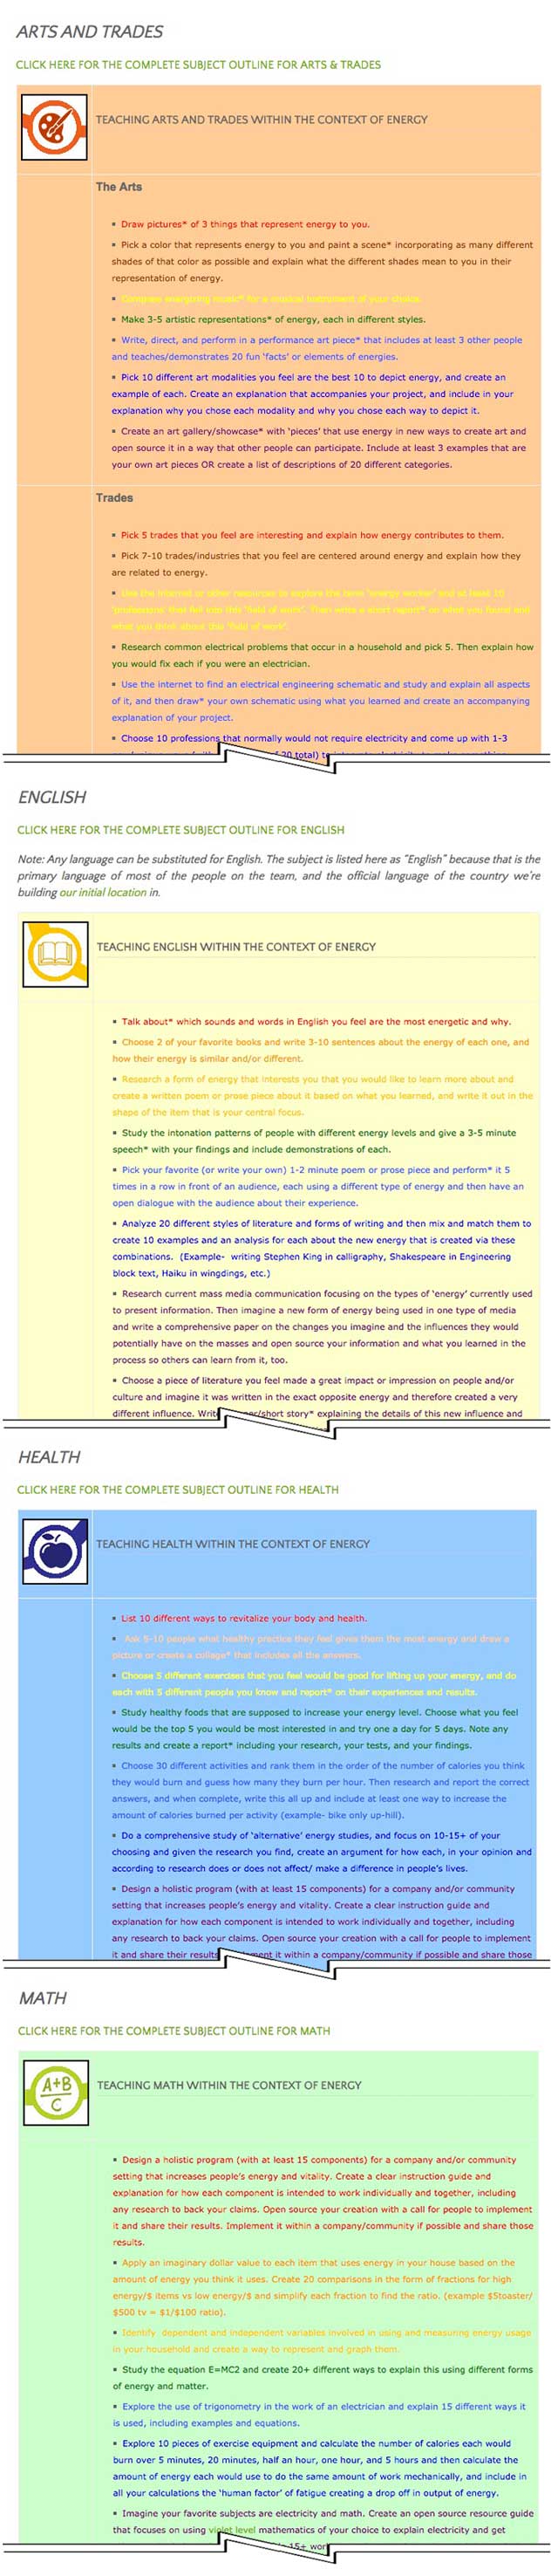 This last week the core team transferred the first 50% of the written content for the Energy Lesson Plan to the website, as you see here. This lesson plan purposed to teach all subjects, to all learning levels, in any learning environment, using the central theme of “Energy” is now 50% complete on our website.